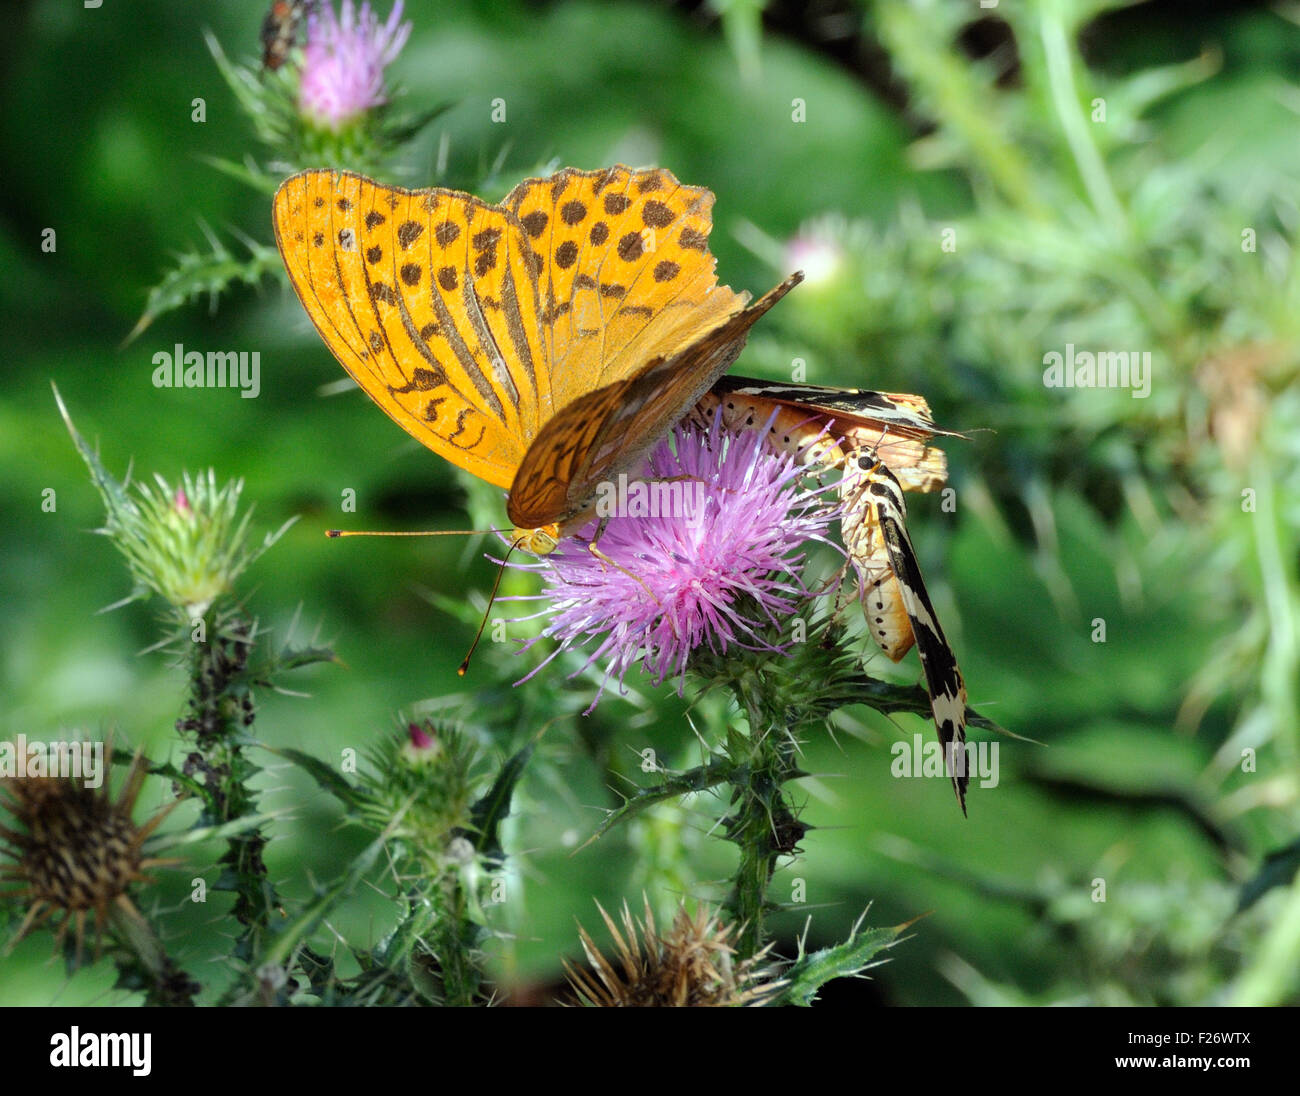 A battered male Silver-washed fritillary (Argynnis paphia) butterfly and Jersey tiger moths (Euplagia quadripunctaria) feeding on thistle flowers. Stock Photo